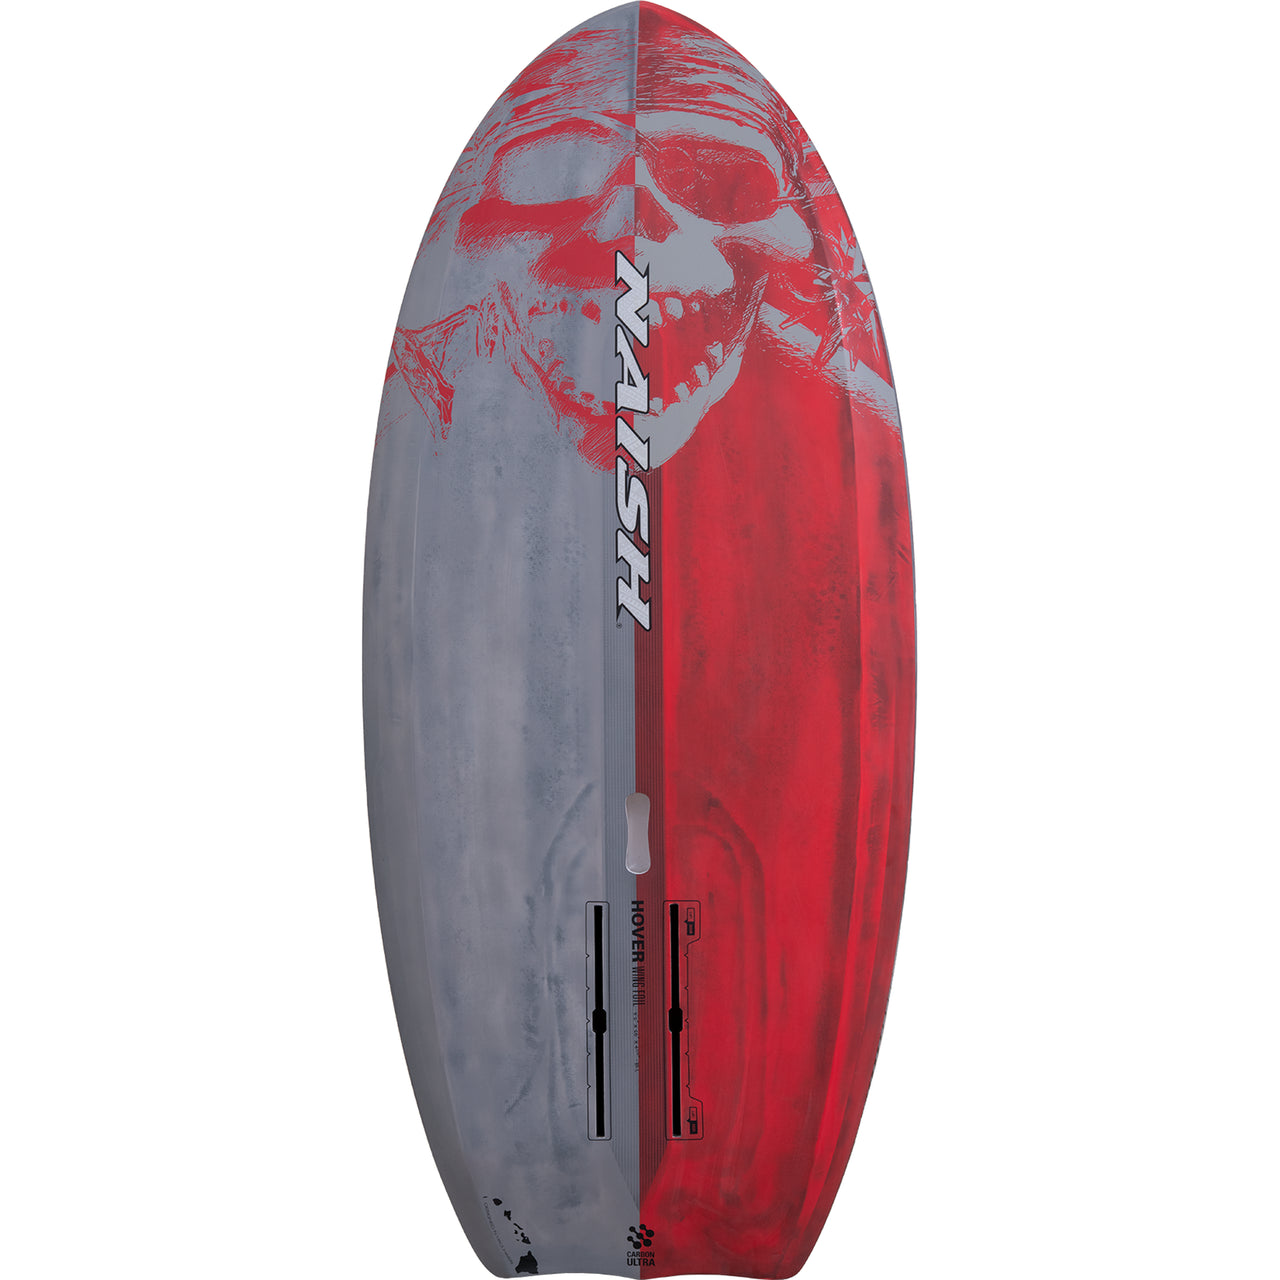 Naish Hover Wing Foil Carbon Ultra LE Wing-Surfing/Foil SUP 95 